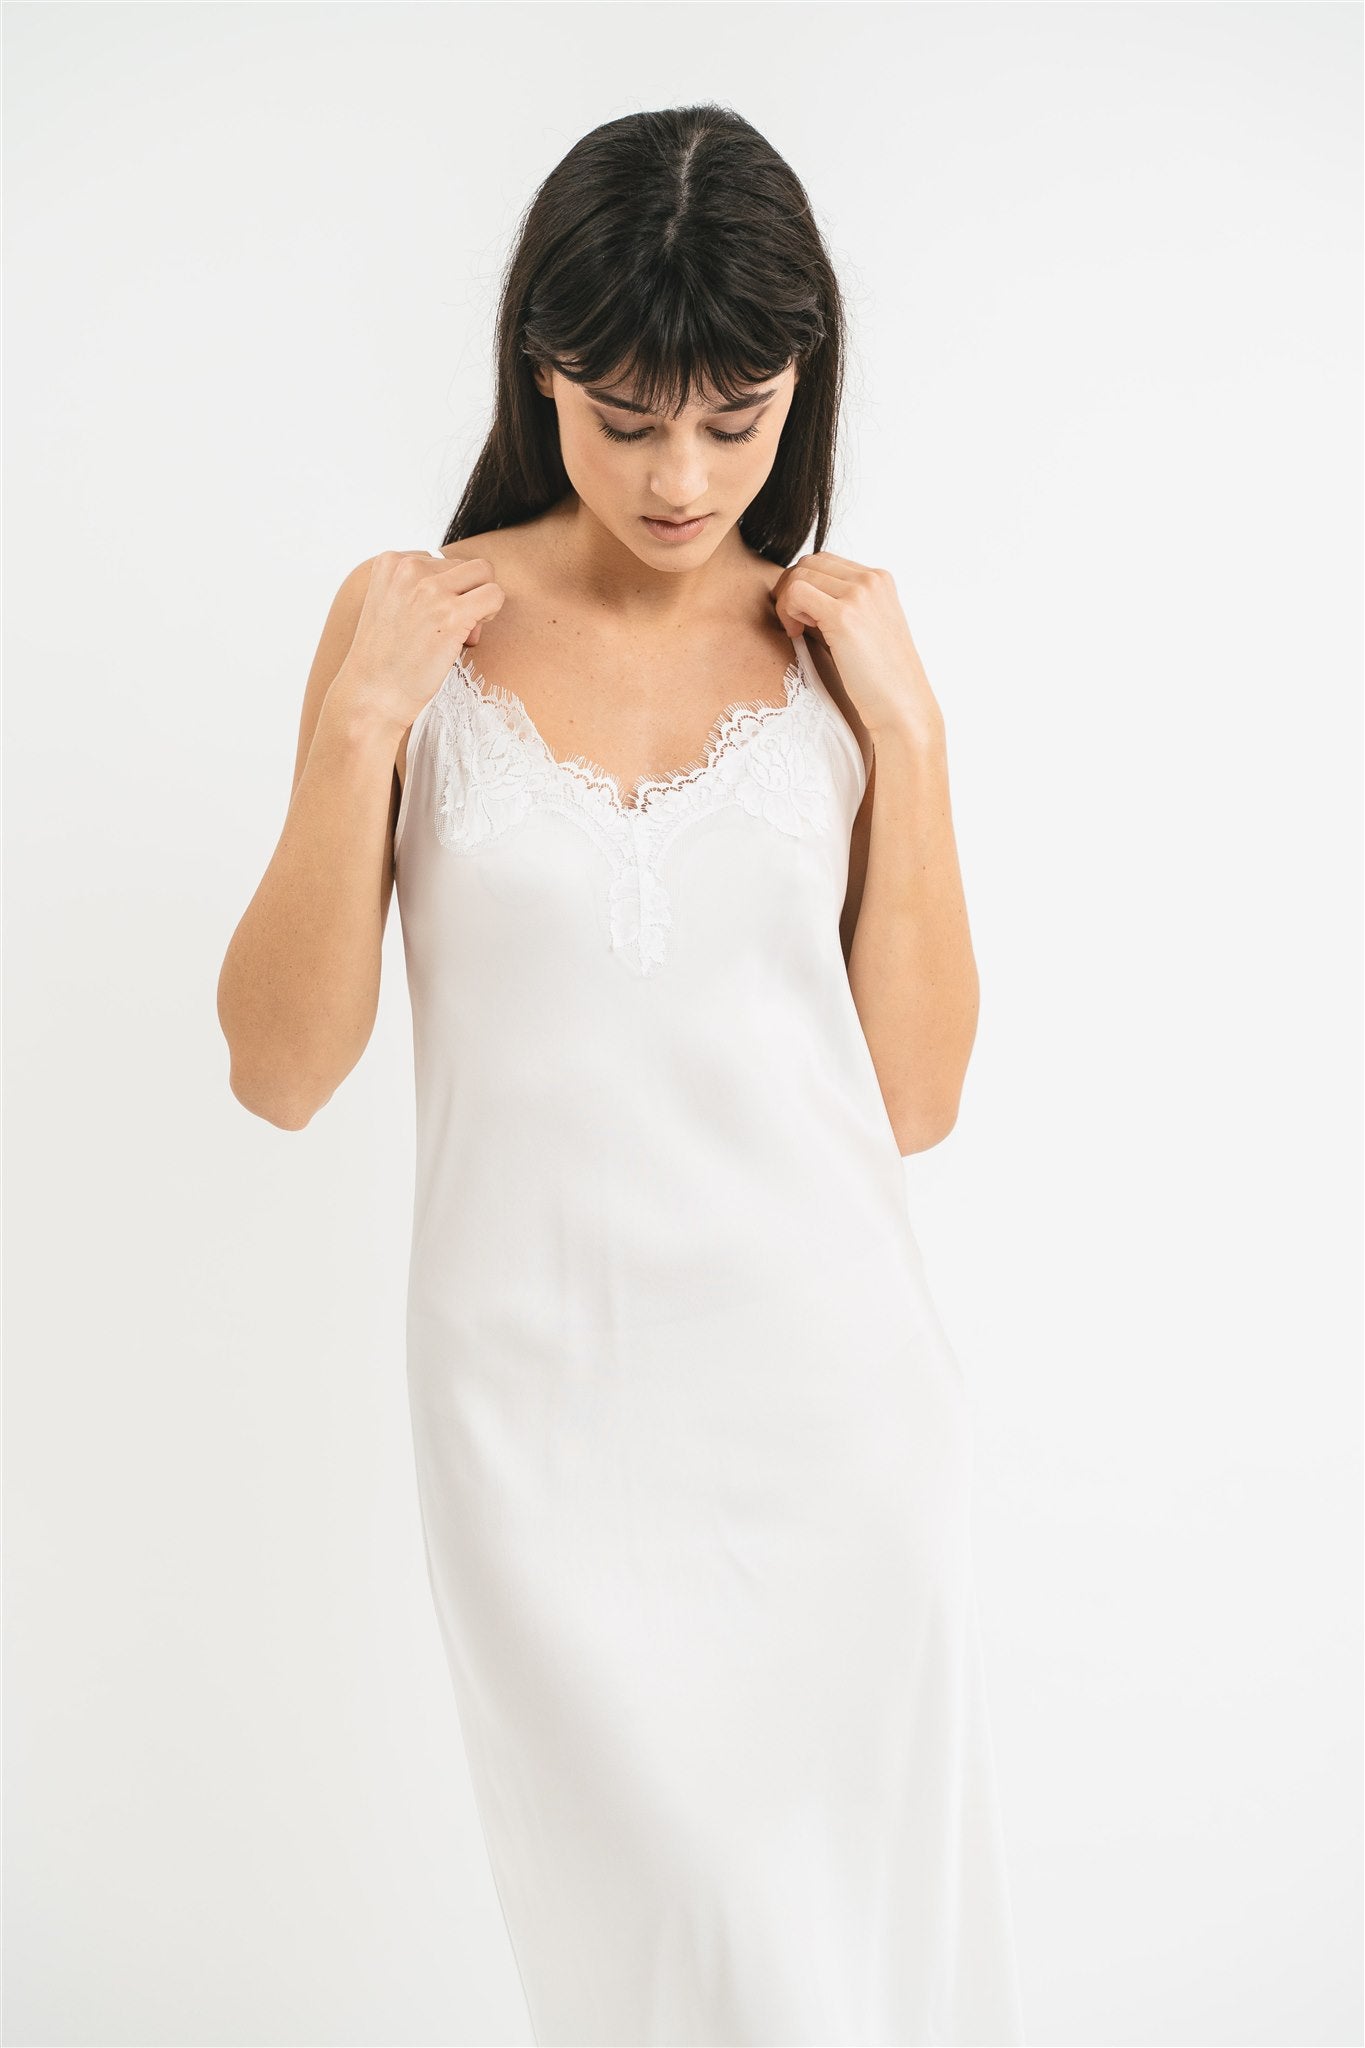 Long slip dress with lace